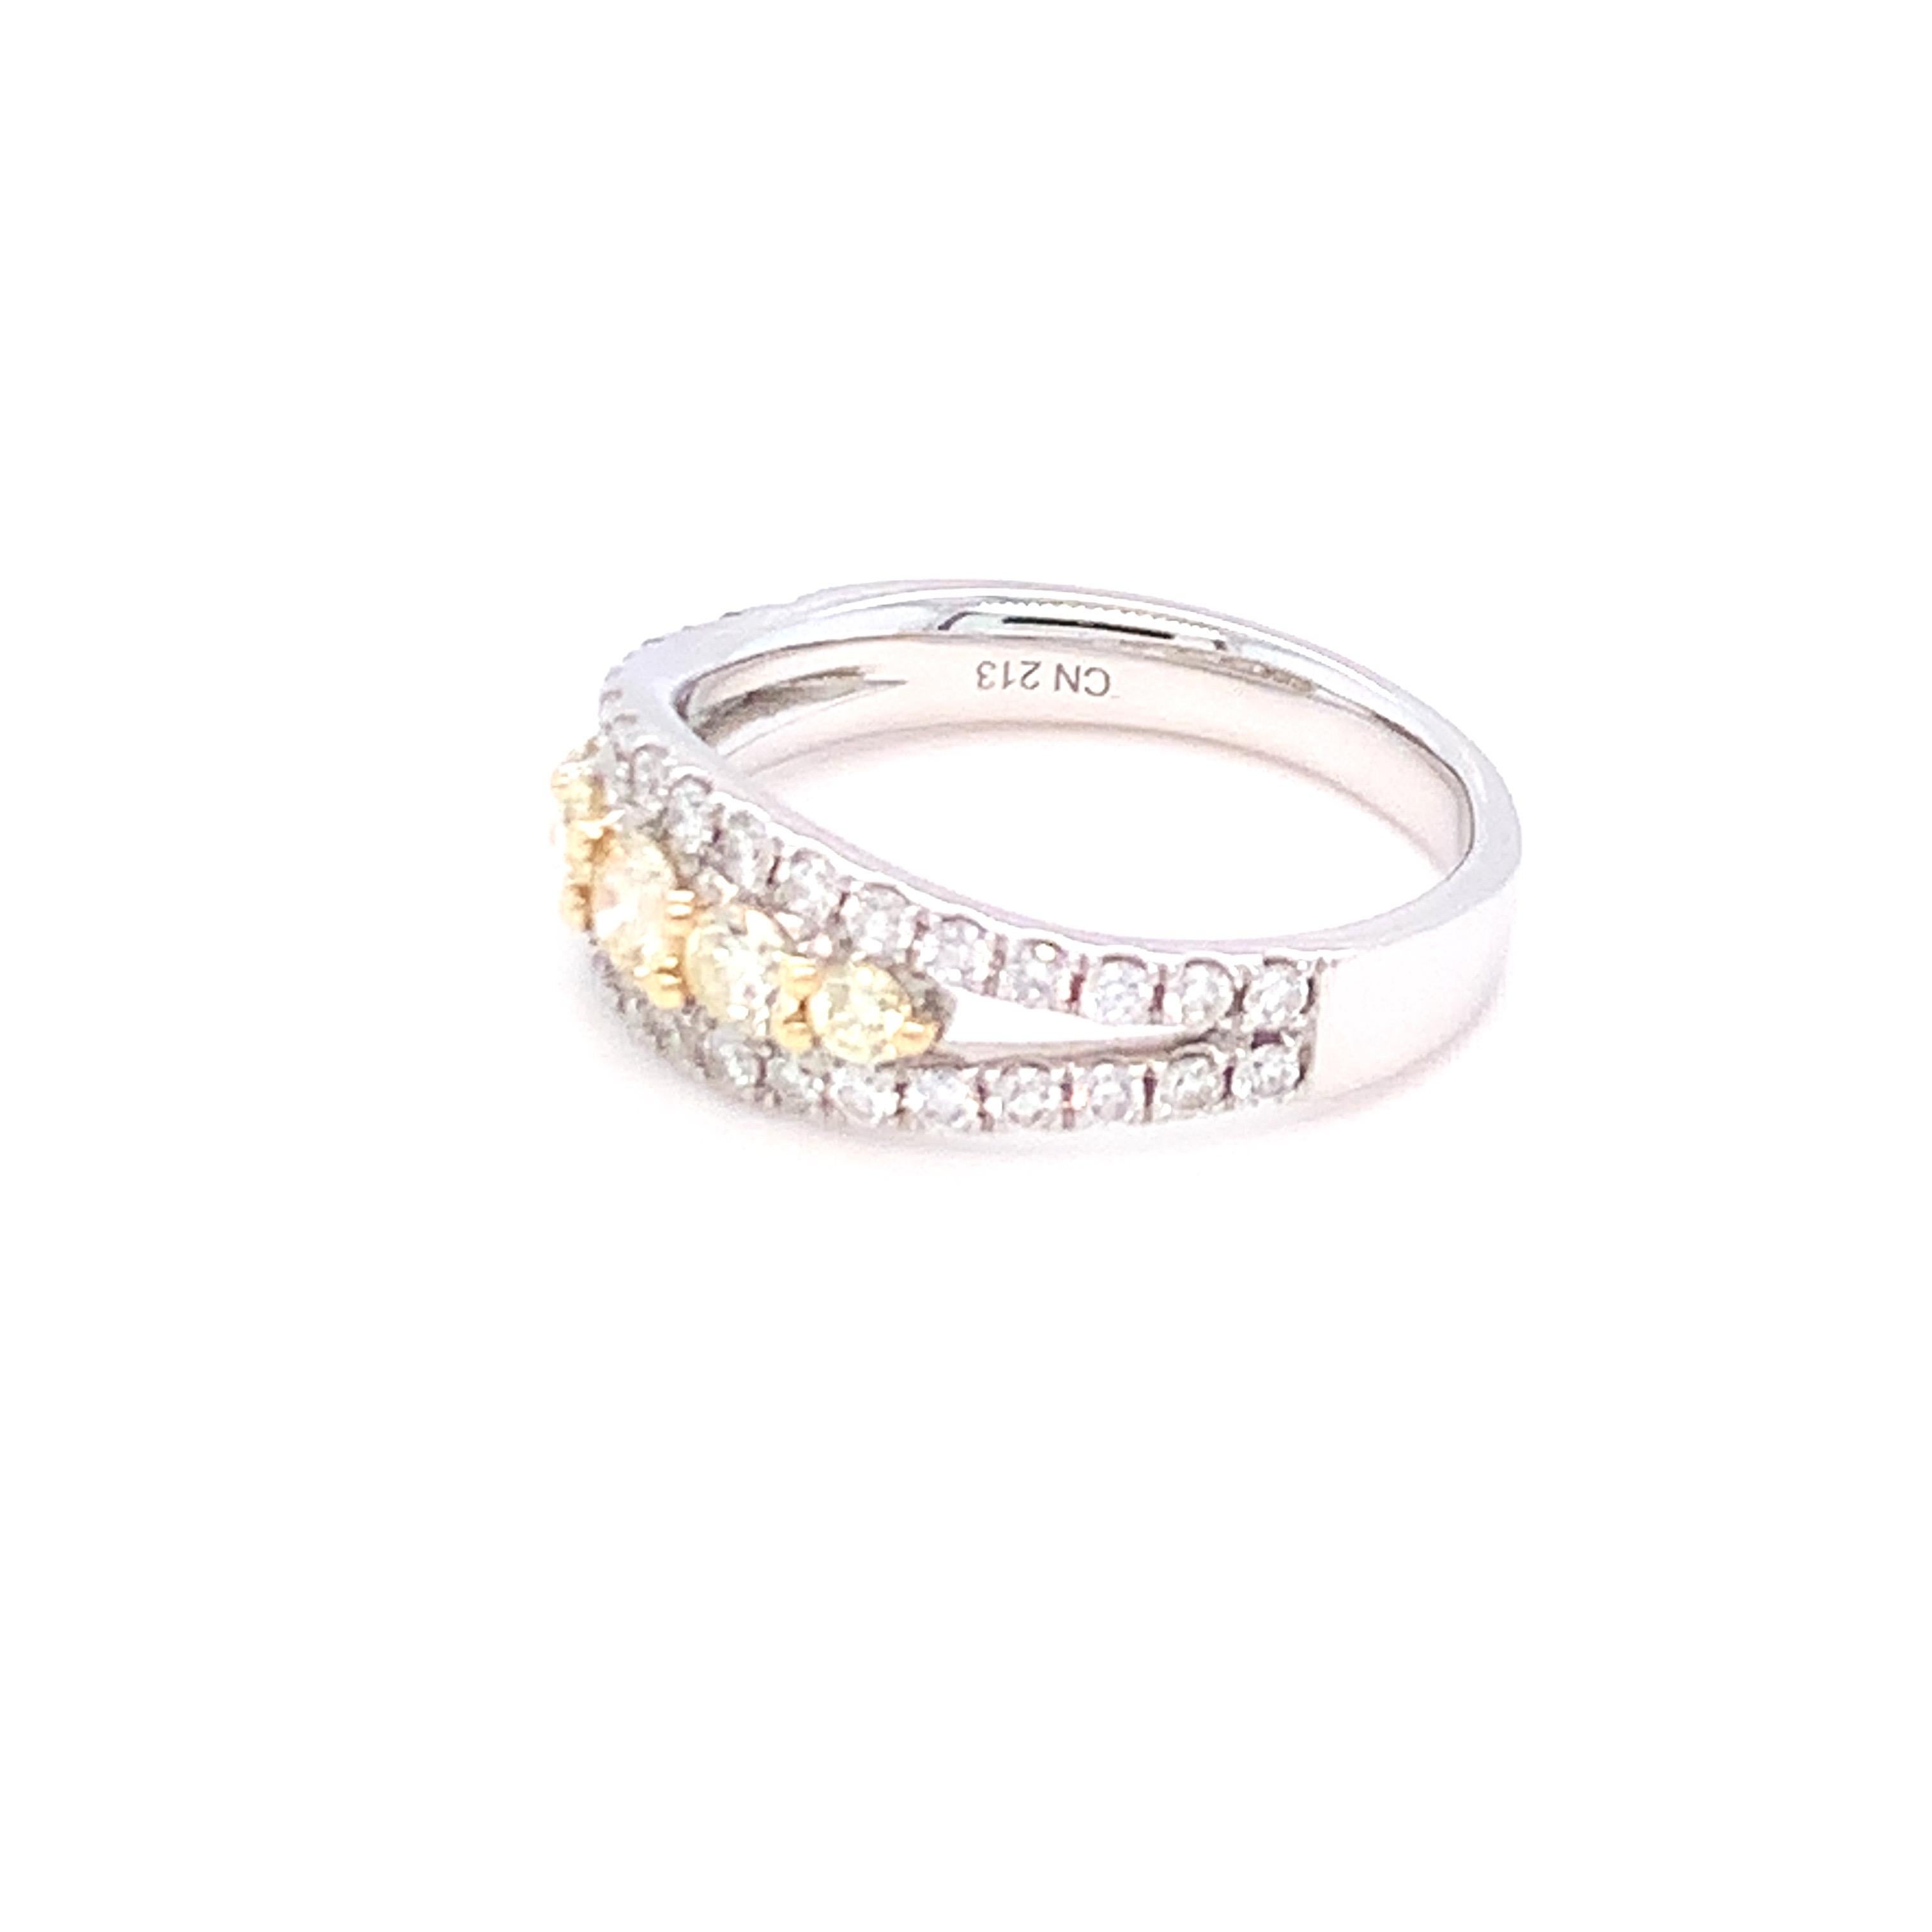 A combination of yellow and white diamond in three rows makes this band a simple and everyday wear piece of jewelry. Set in two tone gold and finished with hands by skilled artisans.
Yellow Diamond: 0.44ct
White Diamond: 0.51ct
Gold: 14K Two